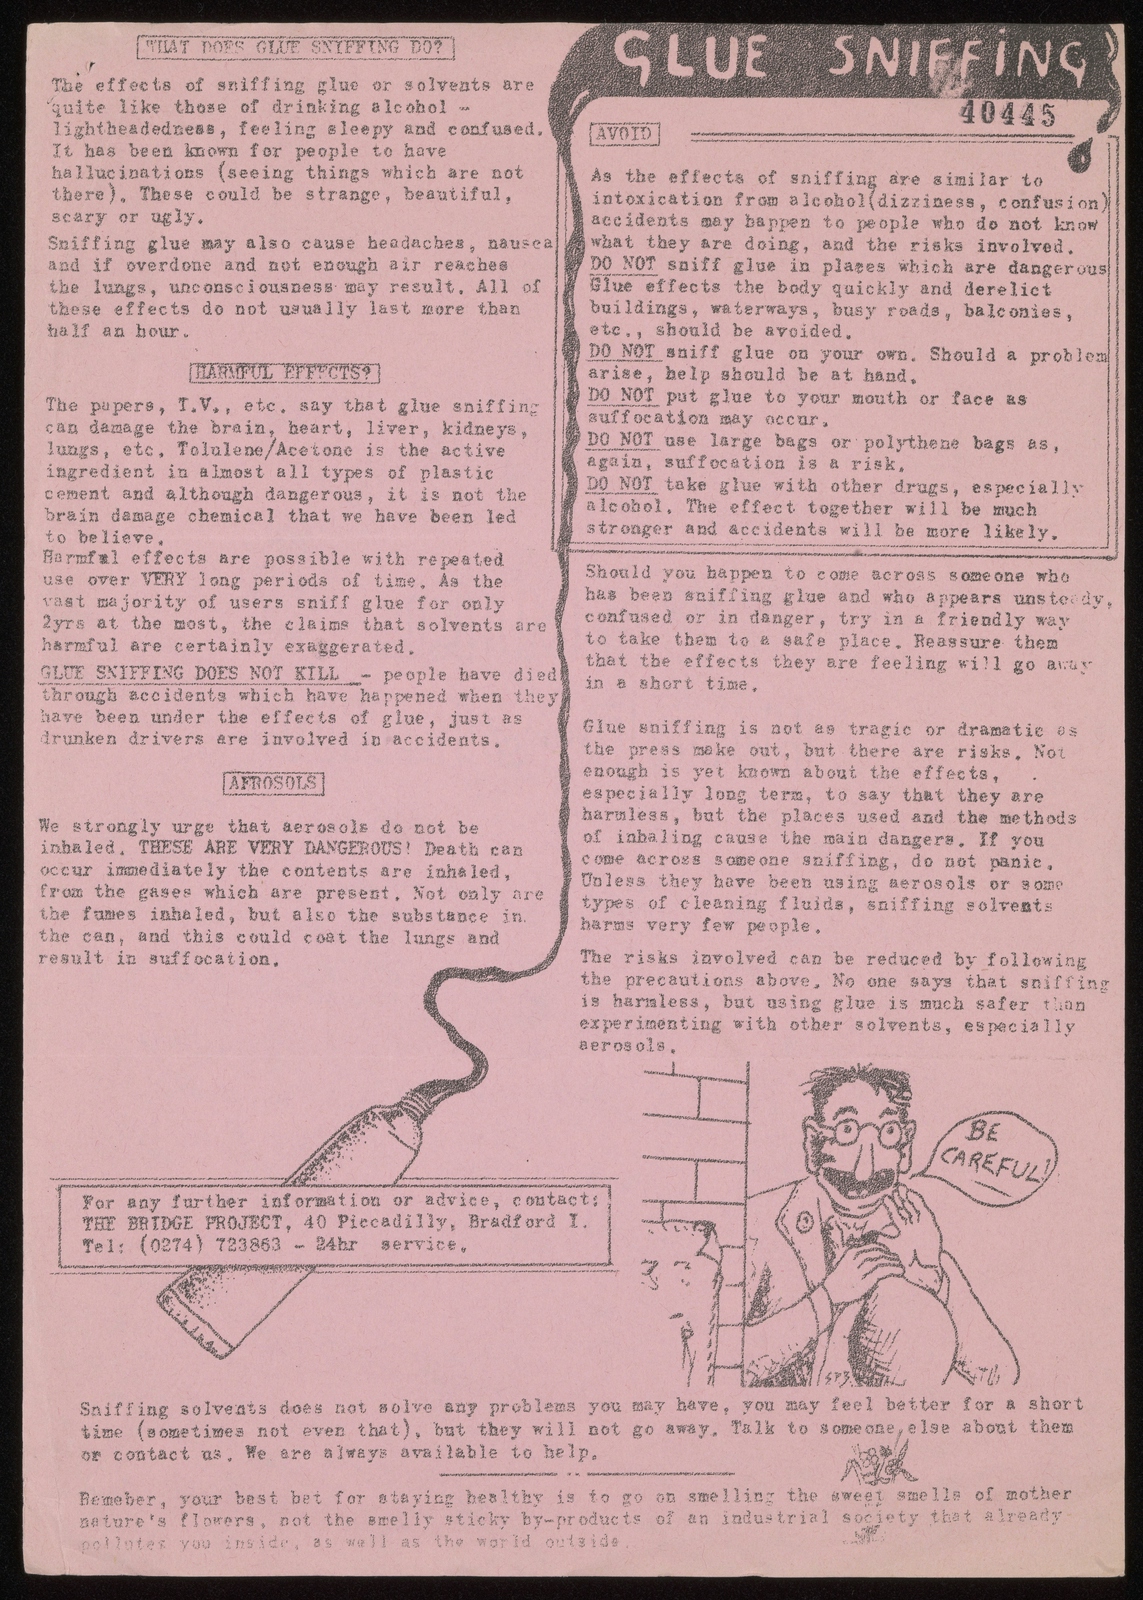 A fact sheet about glue sniffing, black text on pink paper with a hand-drawn illustration of a man saying 'Be careful'.